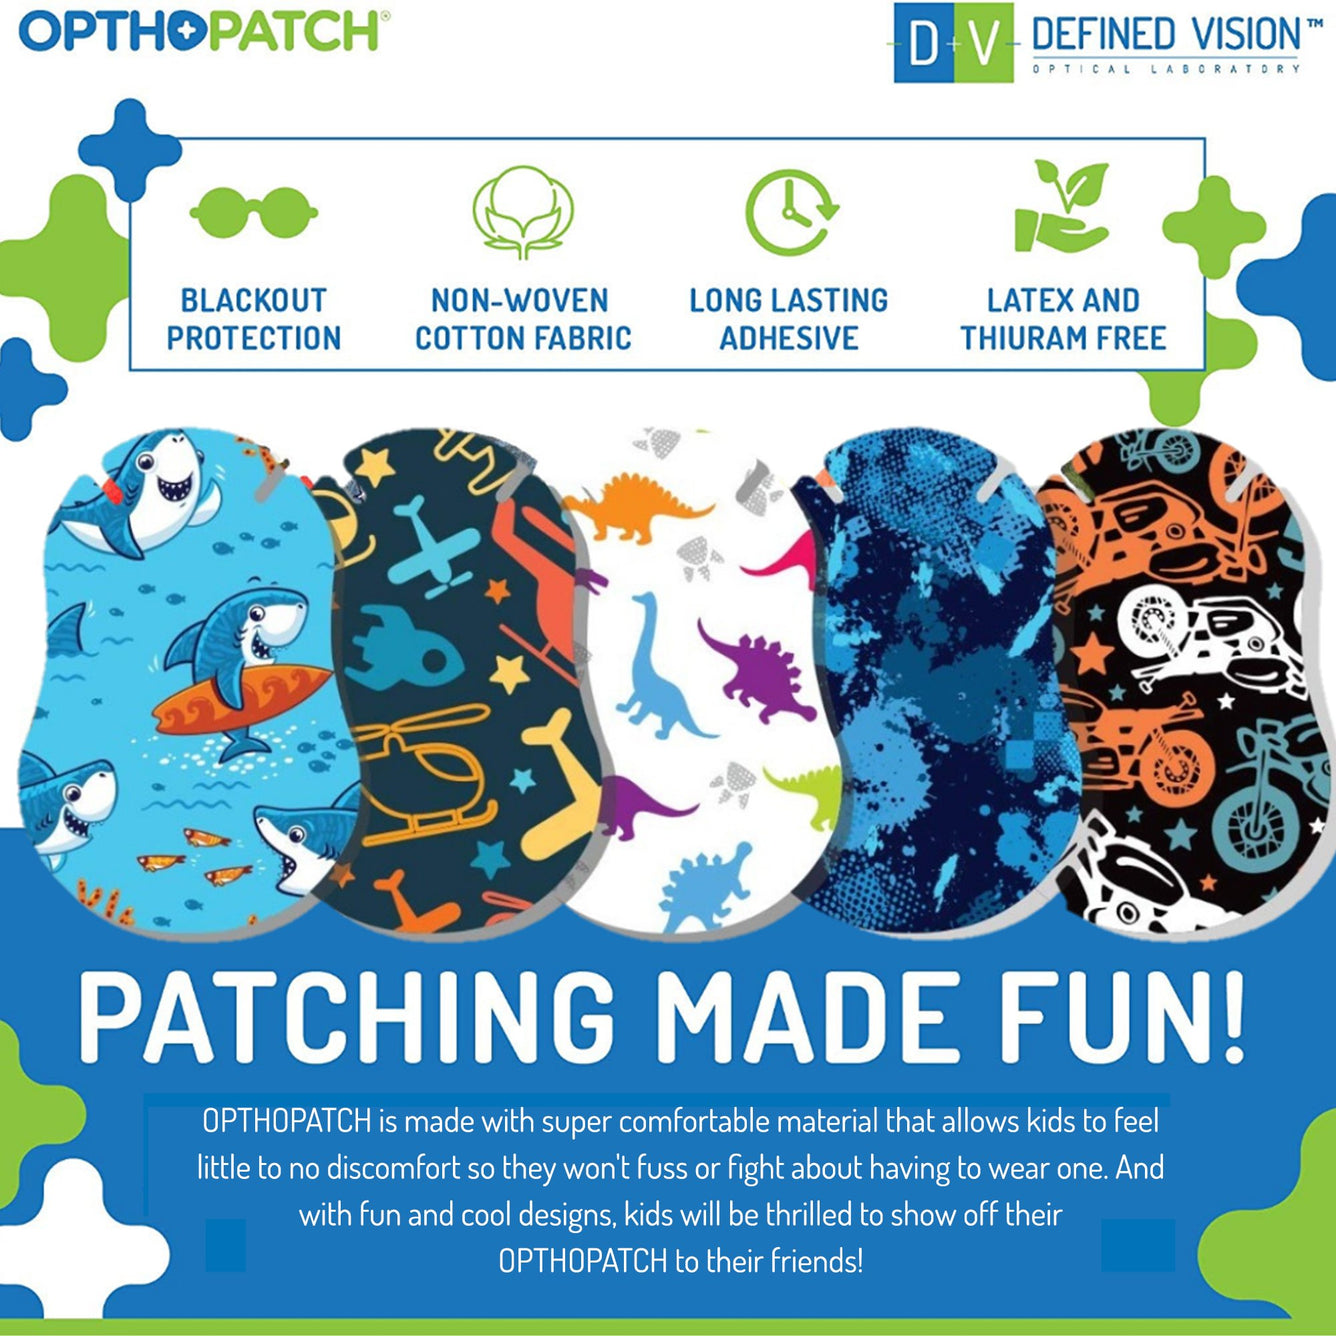 Opthopatch Extra Sensitive Adhesive Eye Patch for Infants with Boys Design  + Reward Charts Included